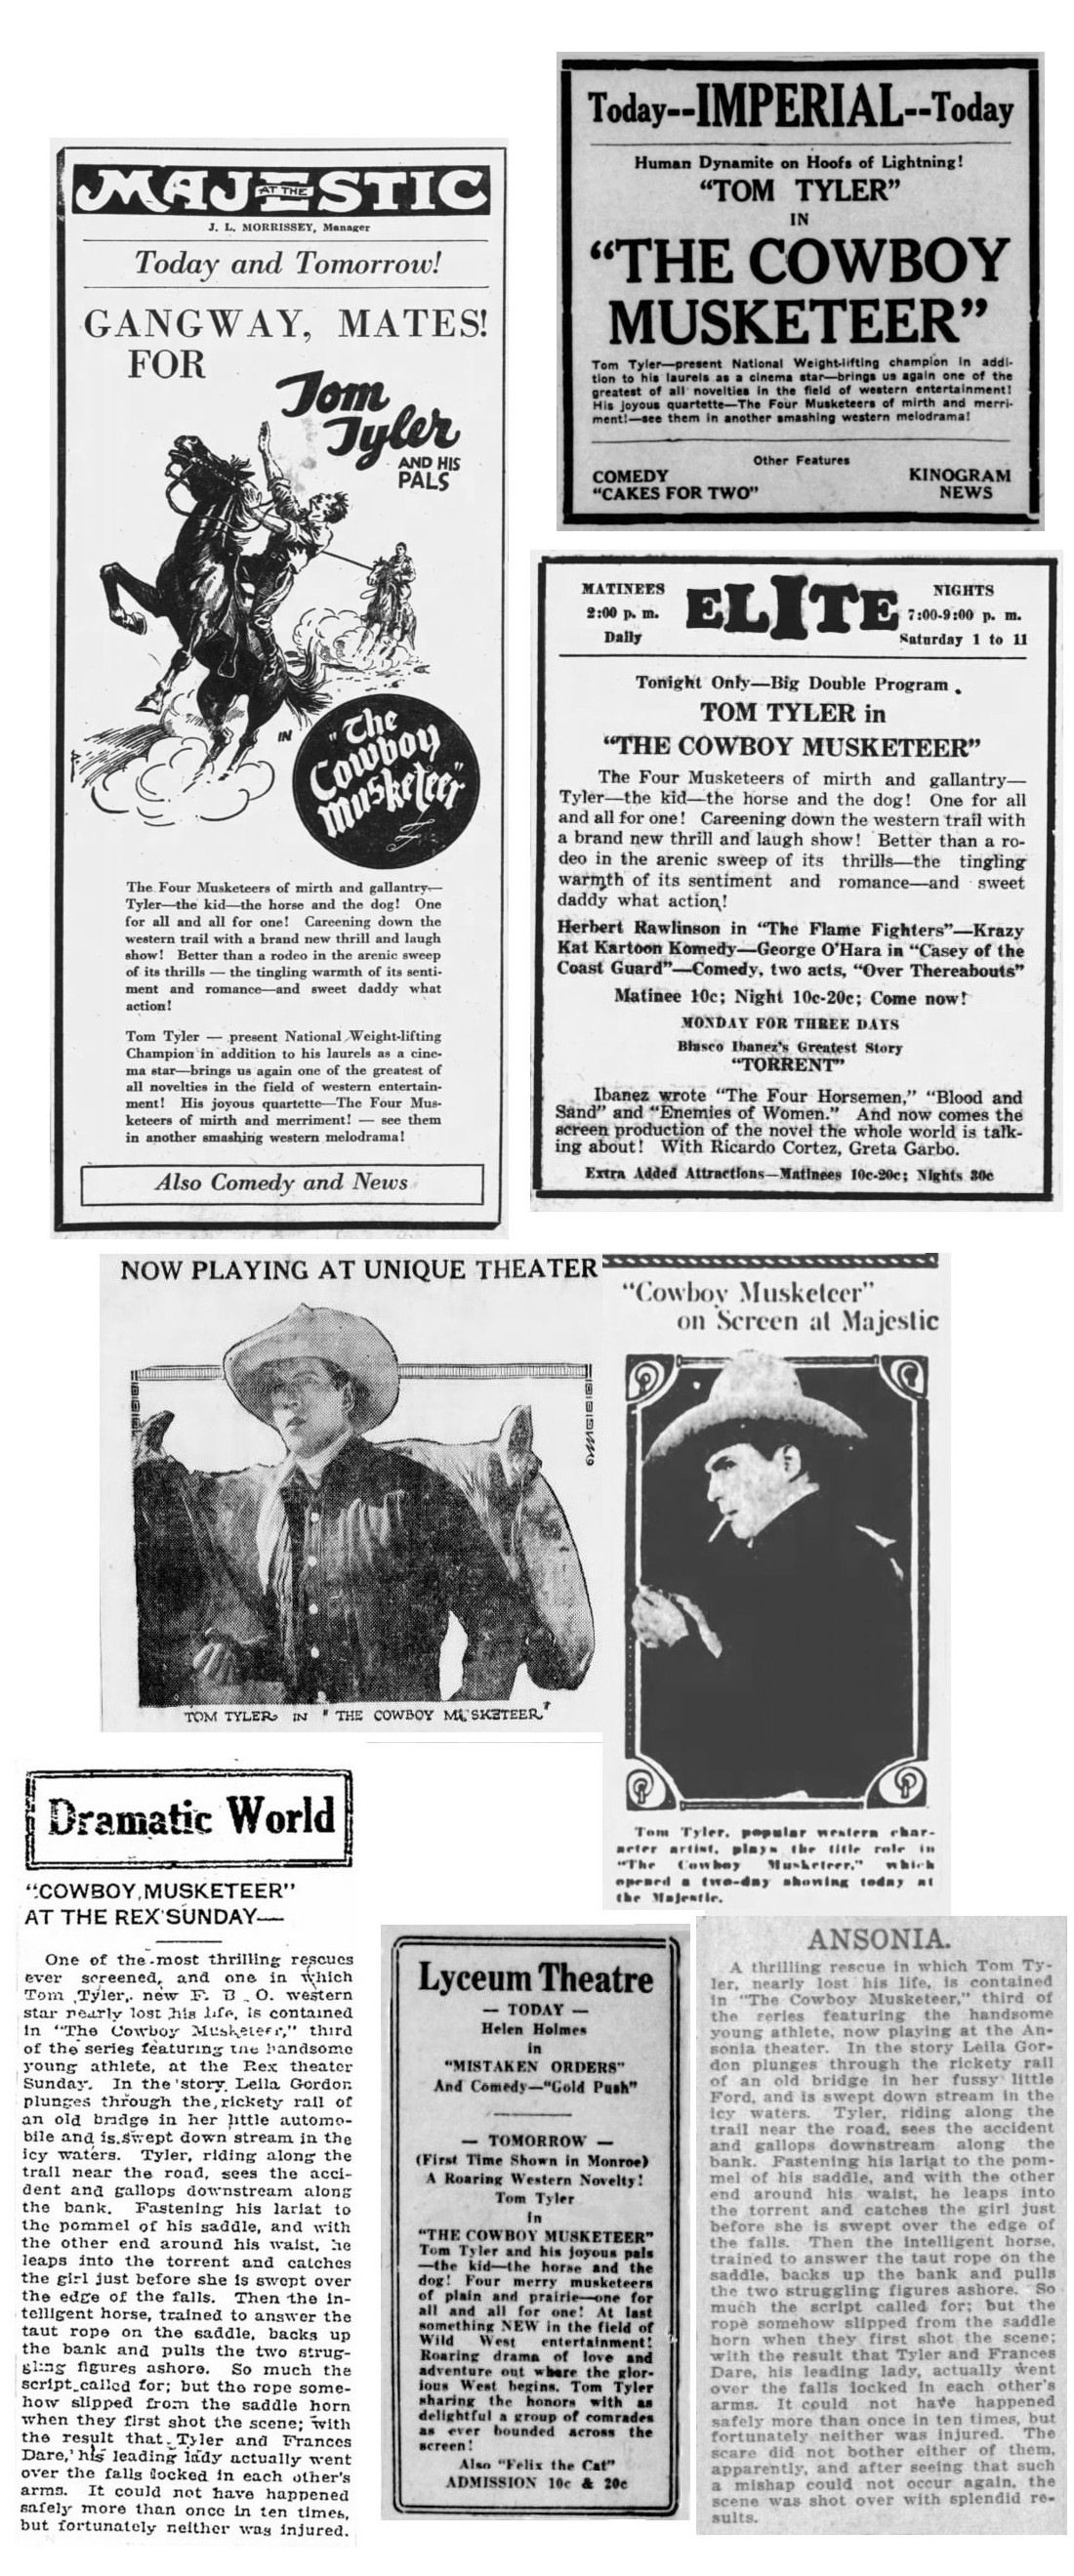 The Cowboy Musketeer cinema ads and film reviews